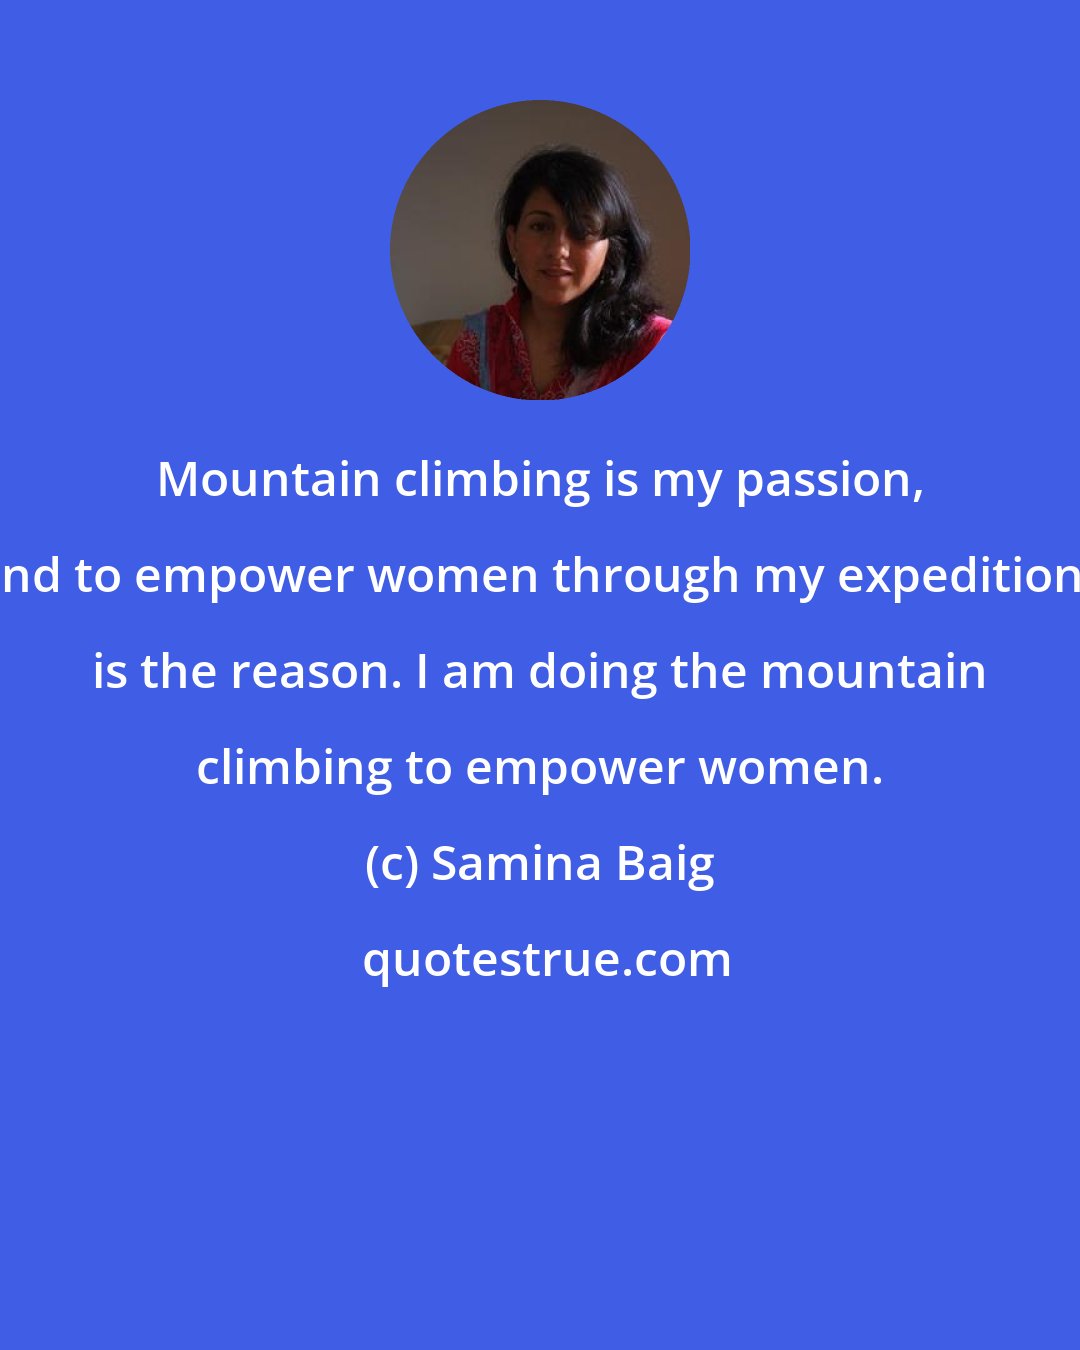 Samina Baig: Mountain climbing is my passion, and to empower women through my expeditions is the reason. I am doing the mountain climbing to empower women.